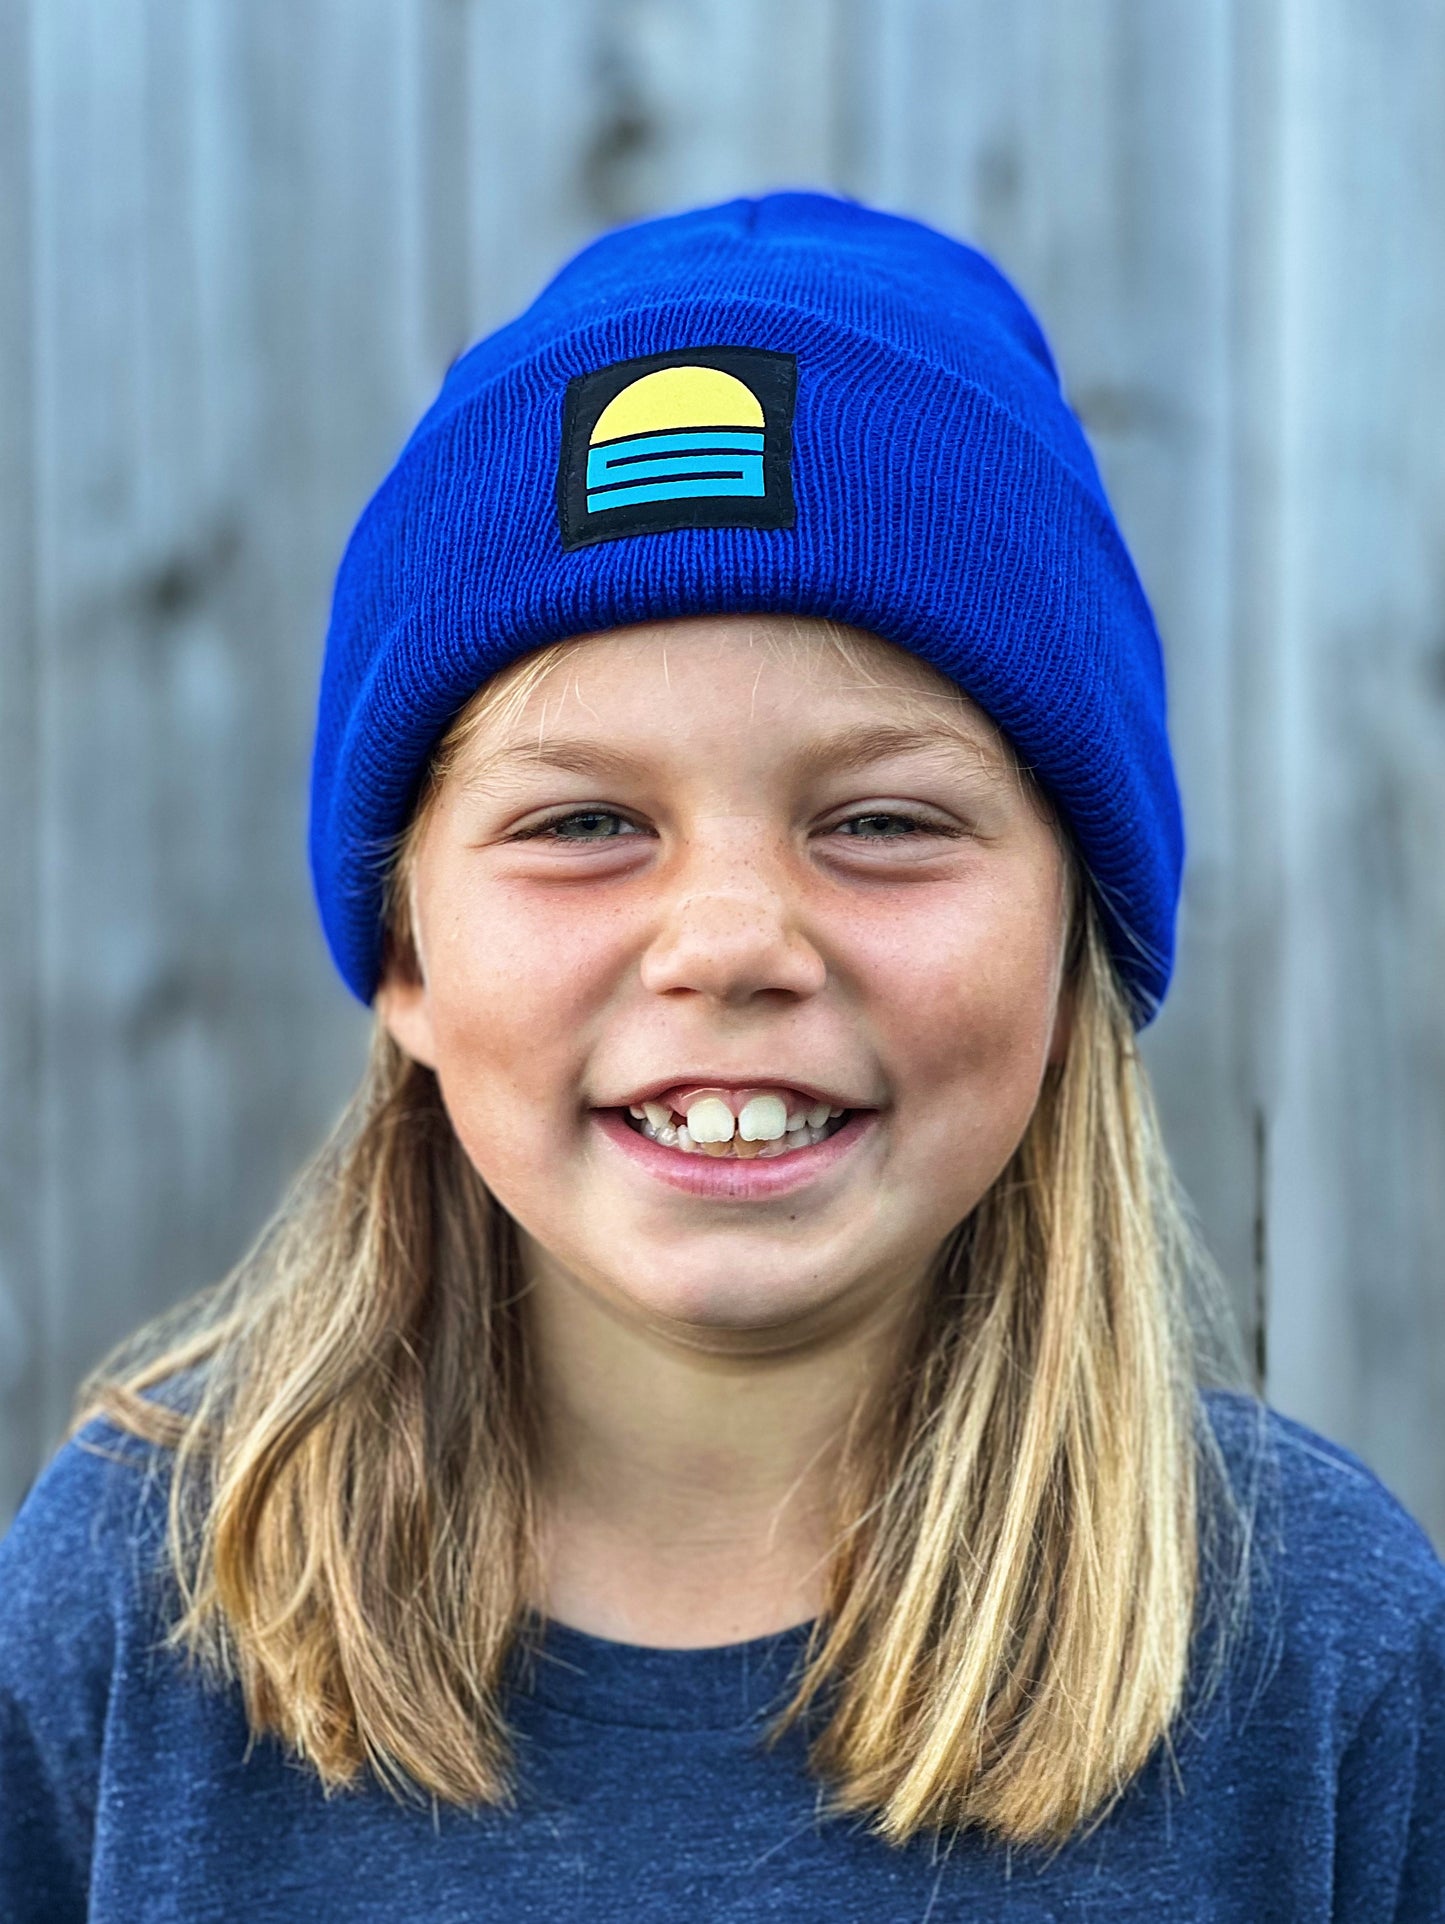 Youth Sunset Cuffed Beanie in Royal Blue